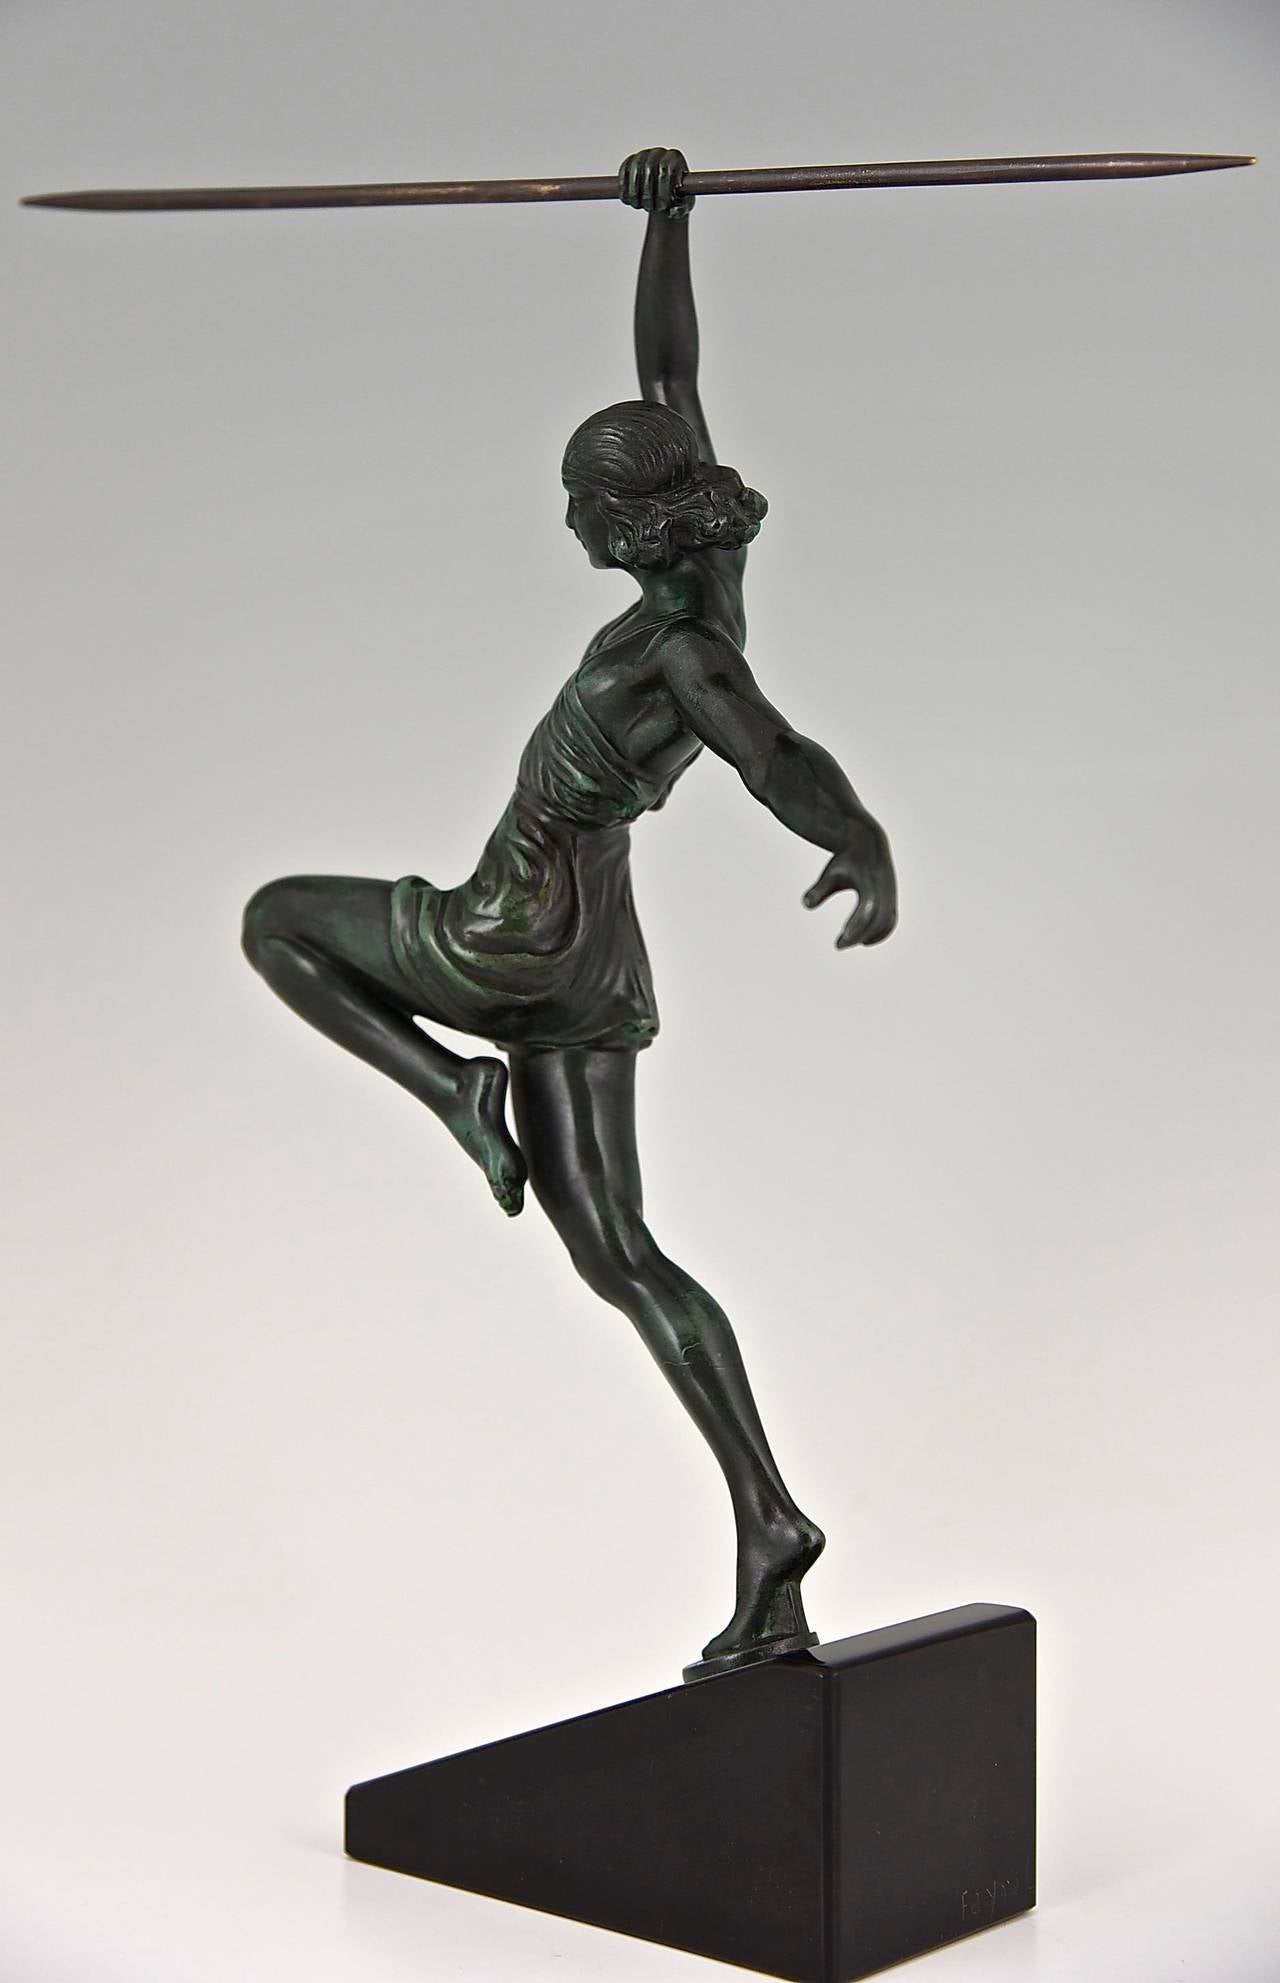 Patinated French Art Deco Sculpture by Fayral, Female Javelin Thrower, 1935